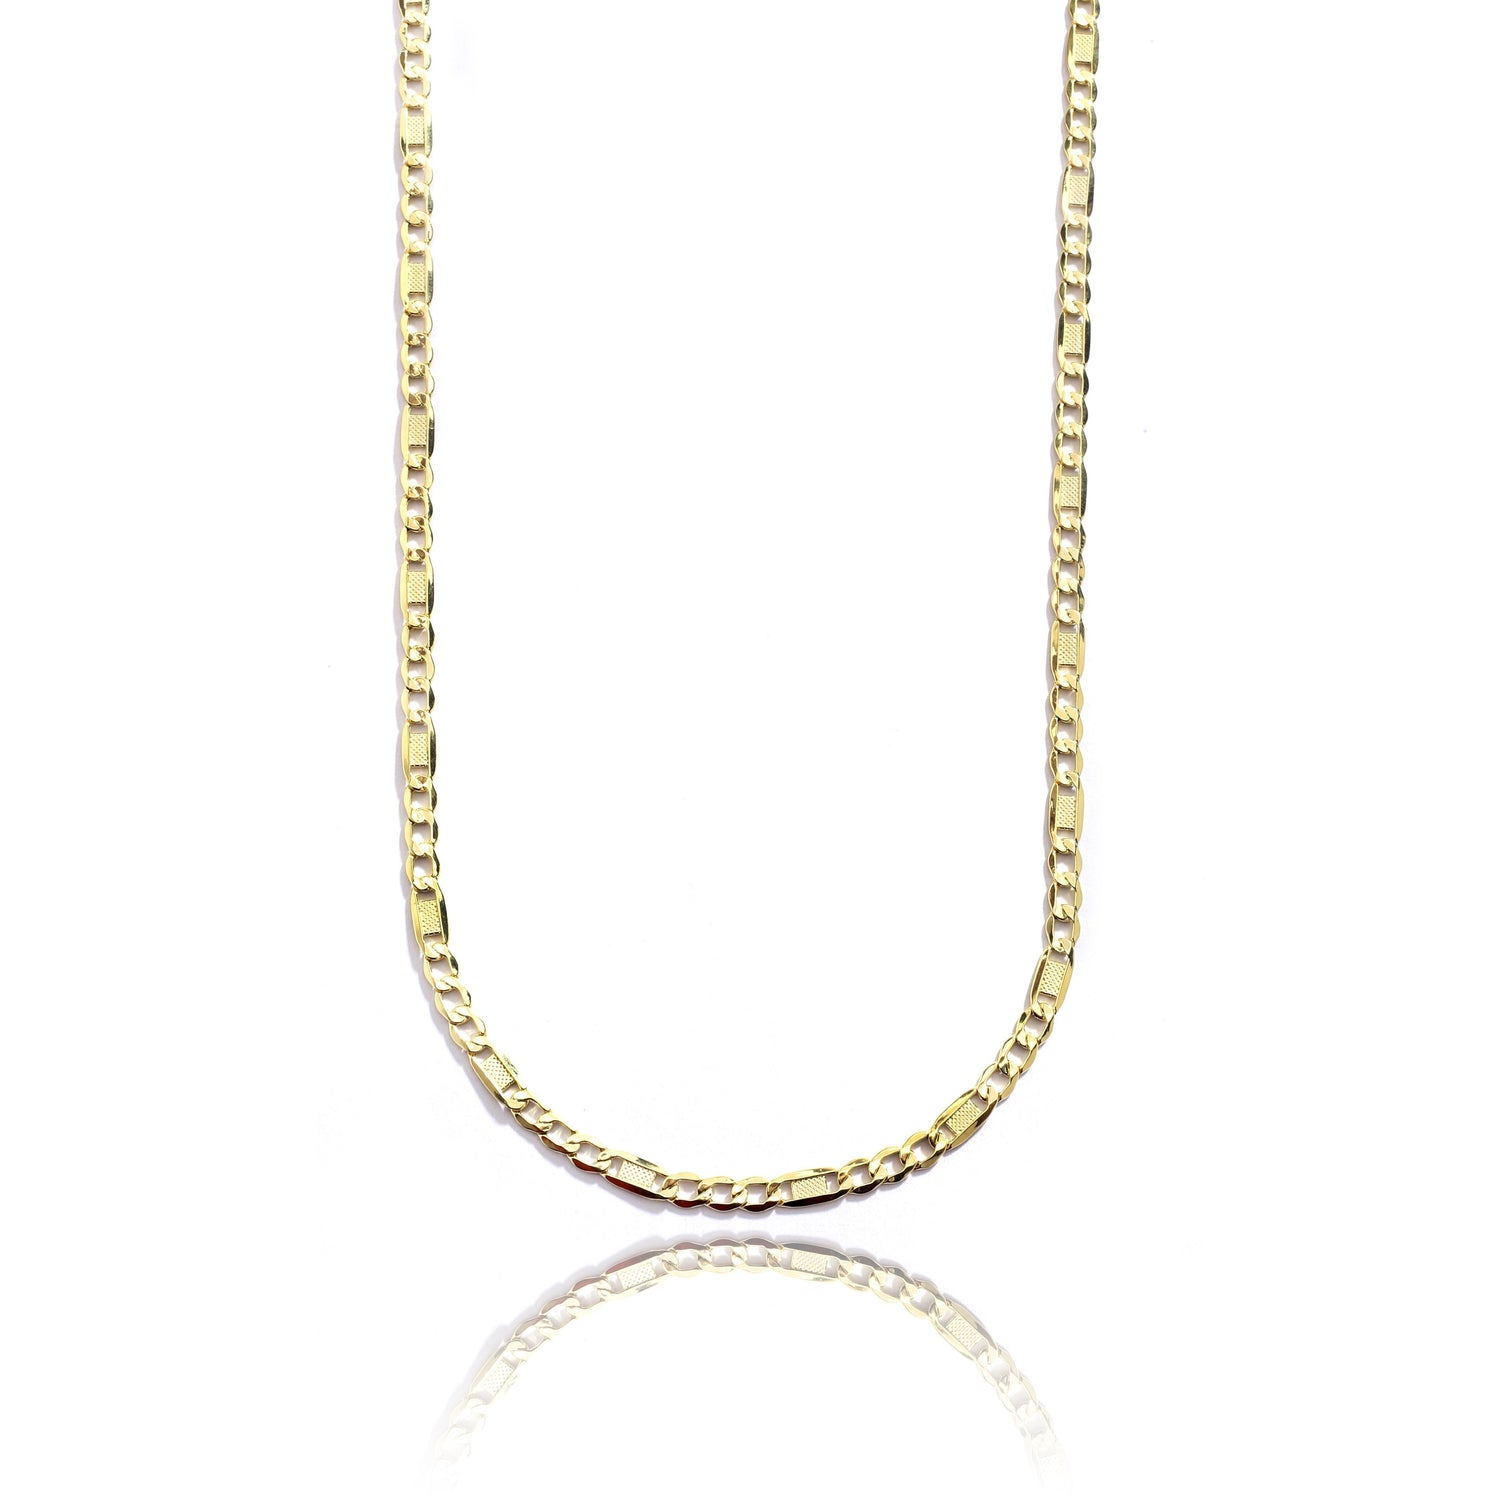 10k Yellow Gold Hollow Bar Figaro Chain Necklace, 5mm